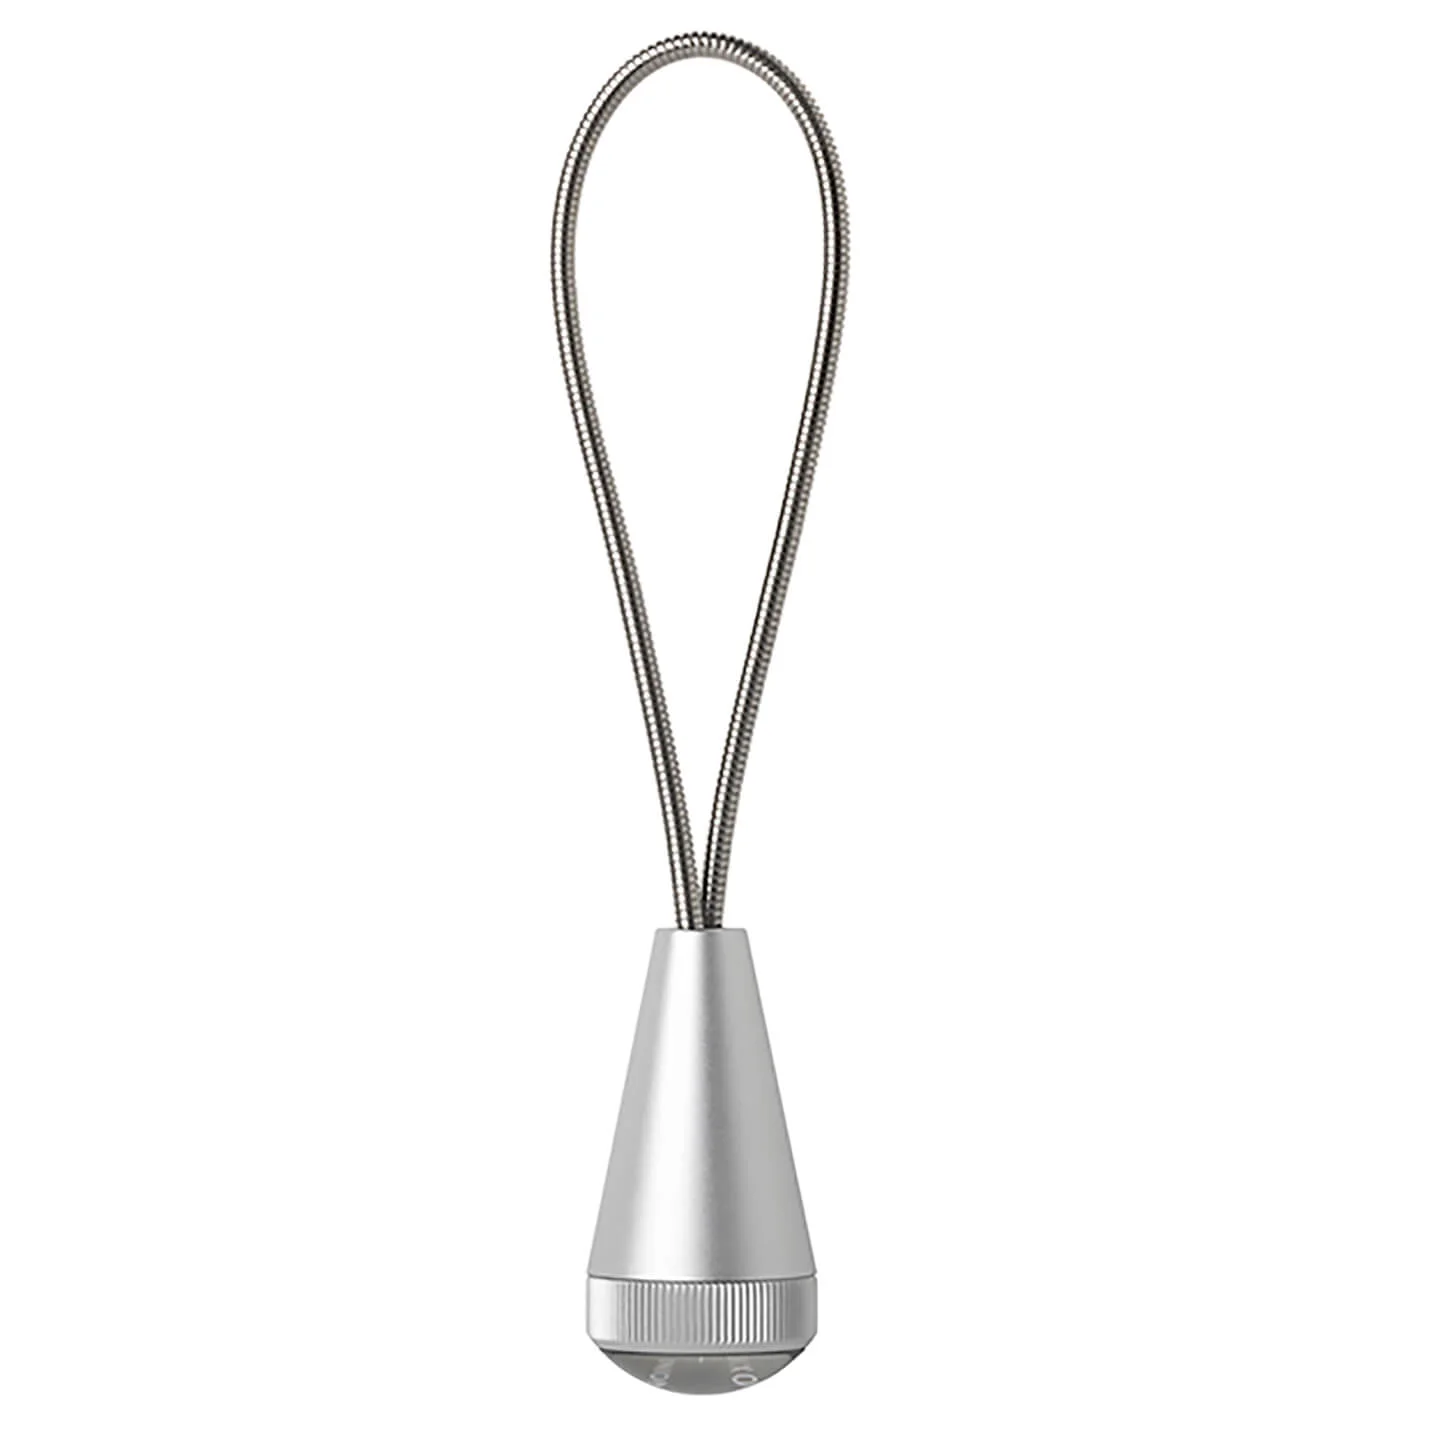 Native Union X Tom Dixon Cone Lightning Cable - Brushed Silver Image 1